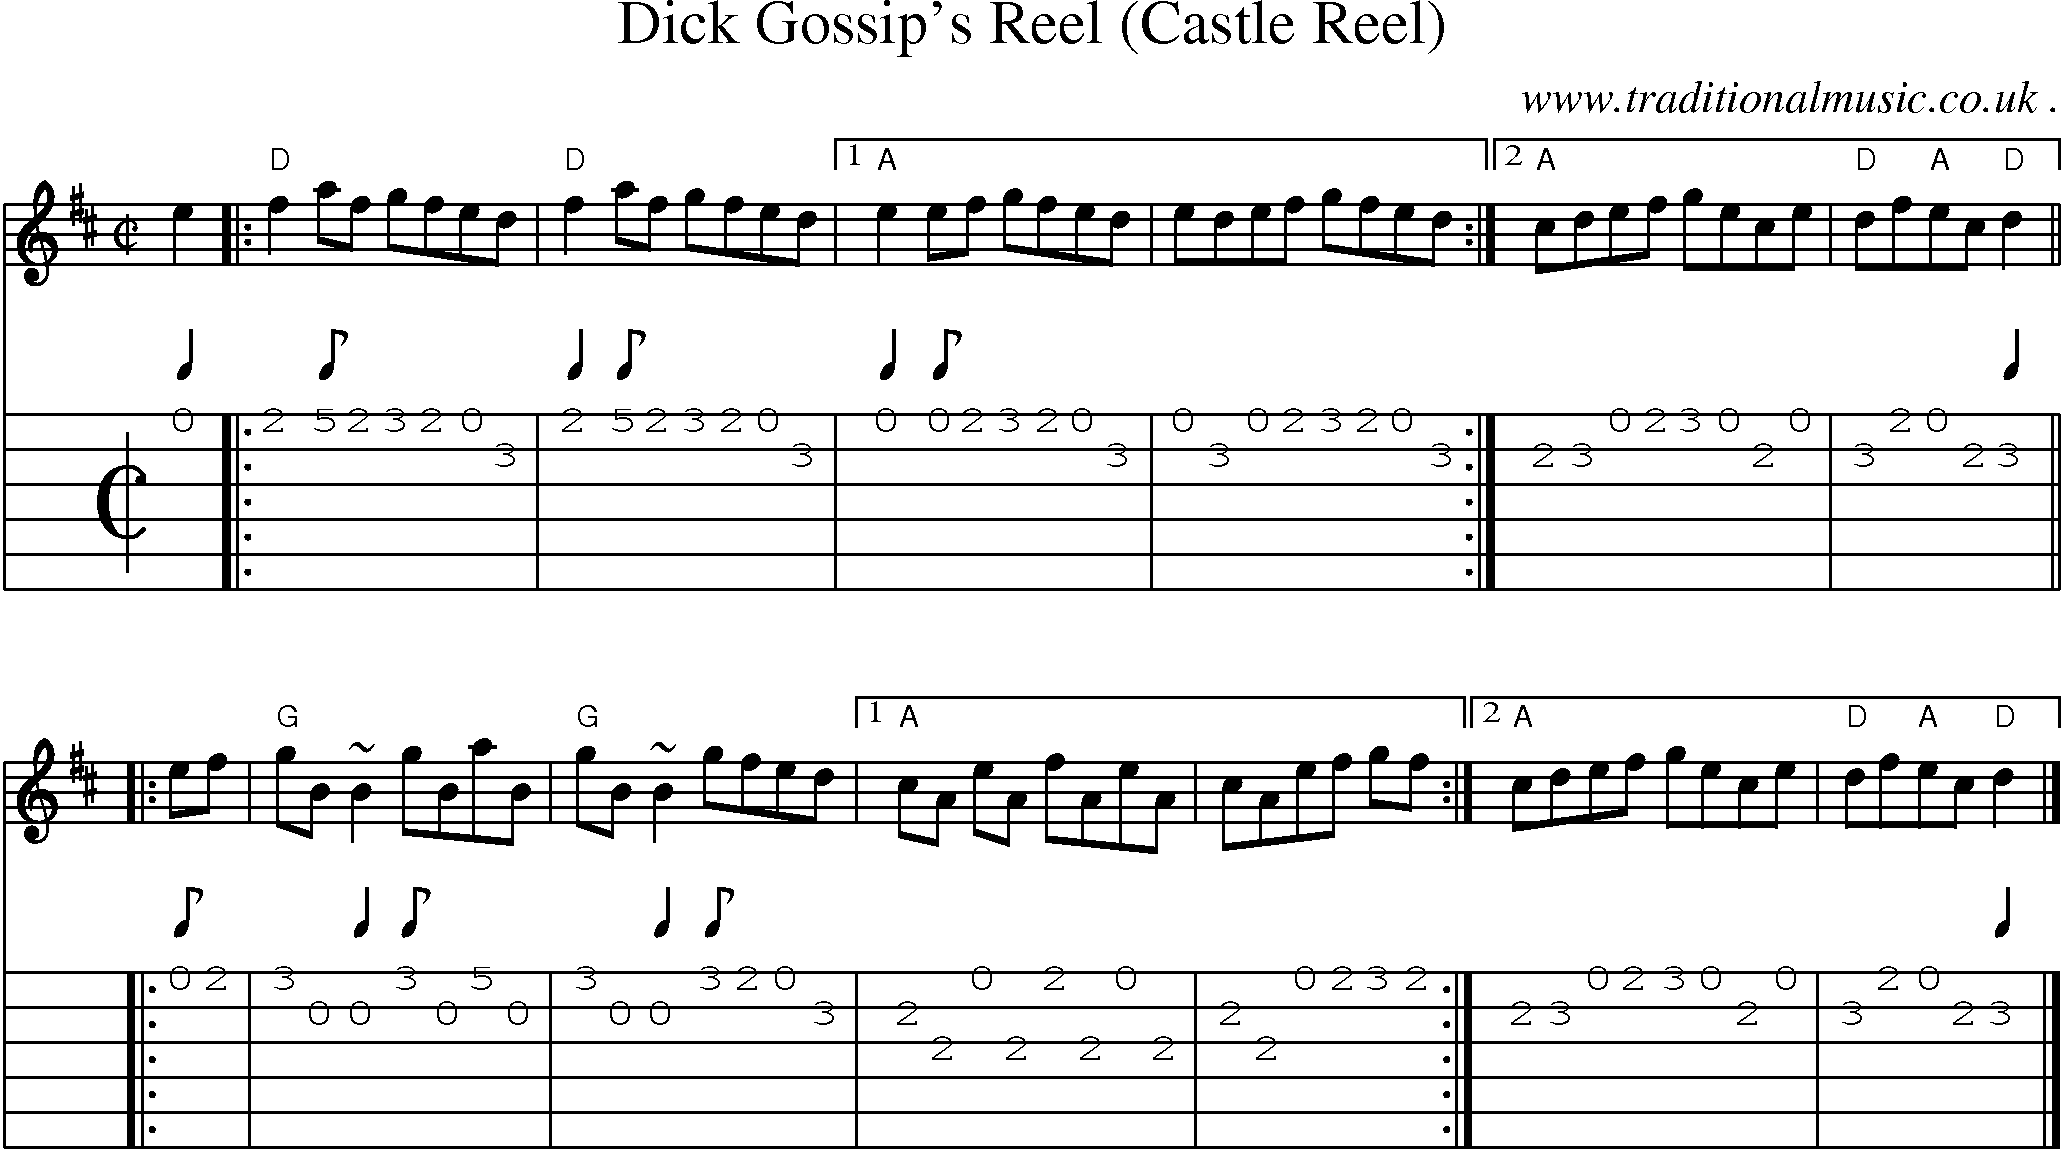 Sheet-music  score, Chords and Guitar Tabs for Dick Gossips Reel Castle Reel